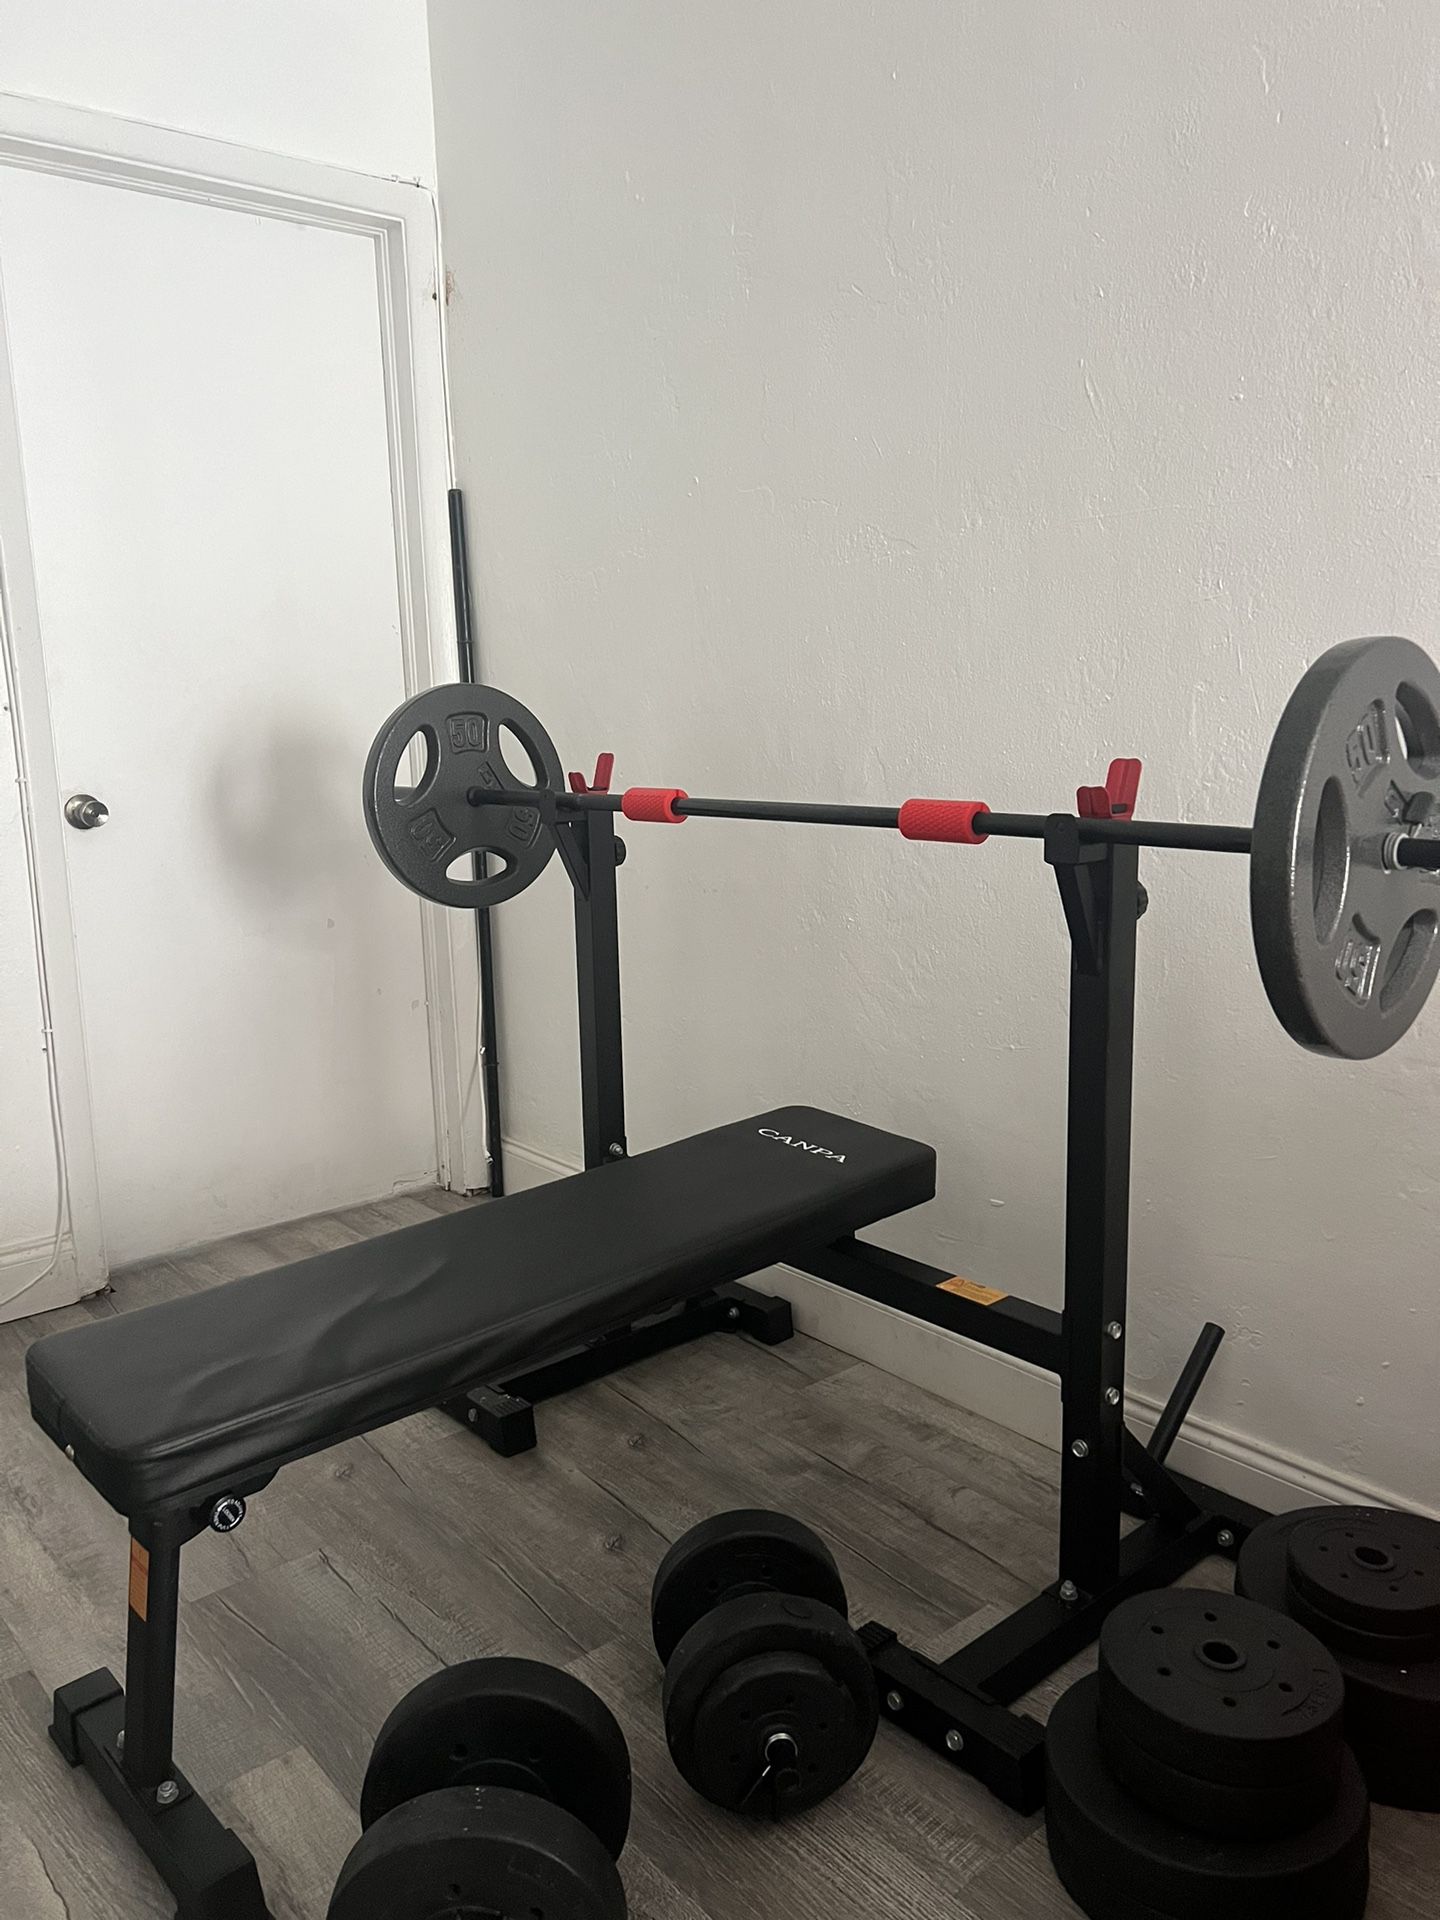 Bench Press + Weights Included 